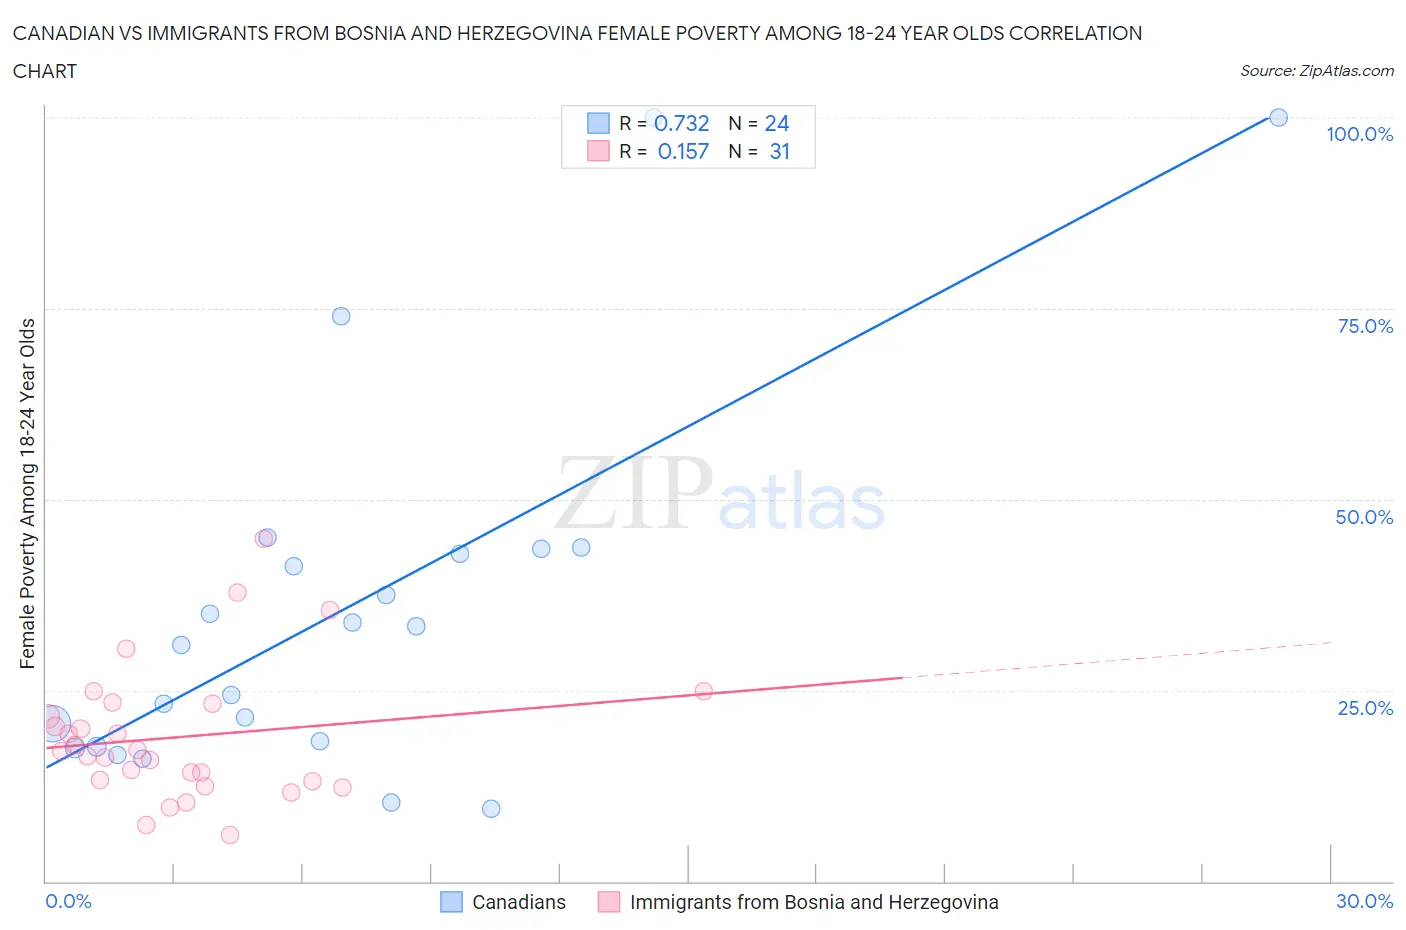 Canadian vs Immigrants from Bosnia and Herzegovina Female Poverty Among 18-24 Year Olds